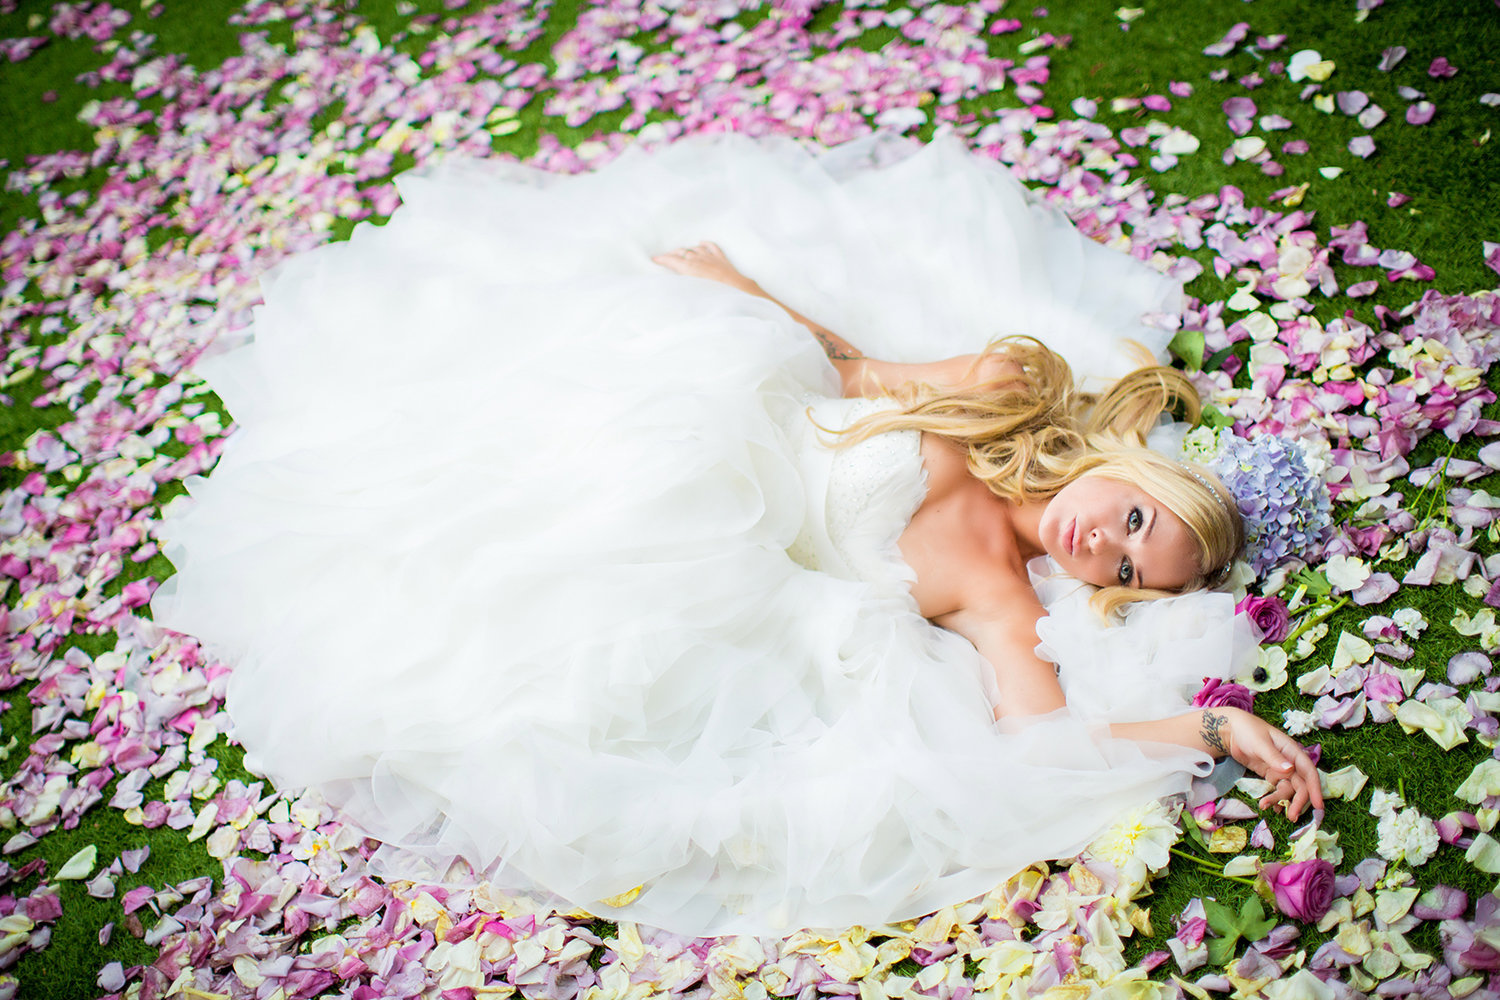 Beautiful bride laying on a bed of rose petals